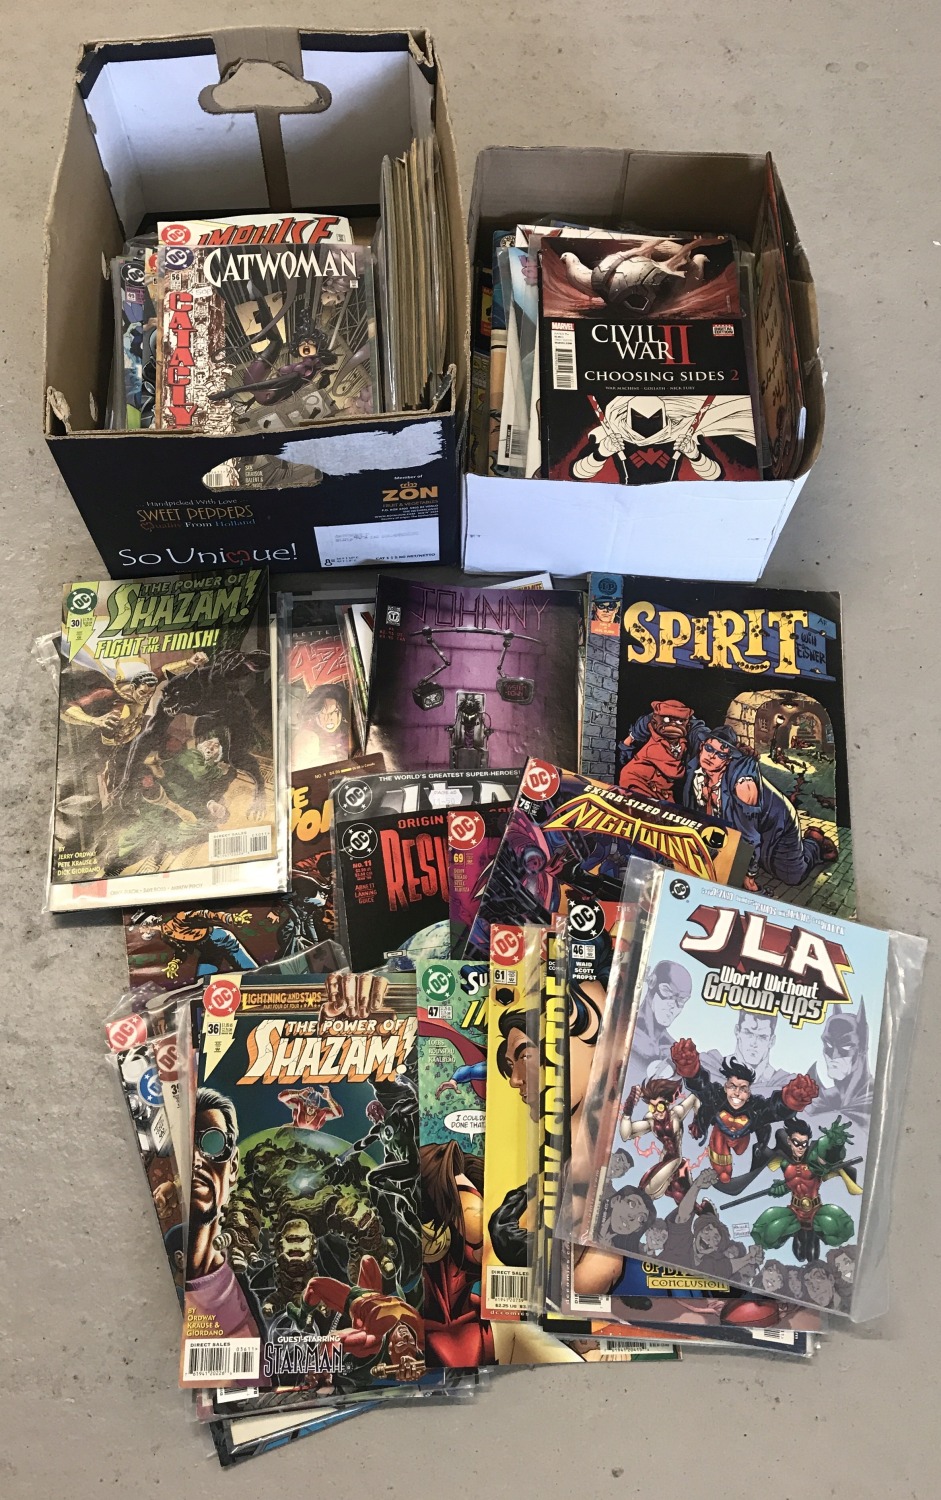 2 boxes containing 155 comics to include DC comics.